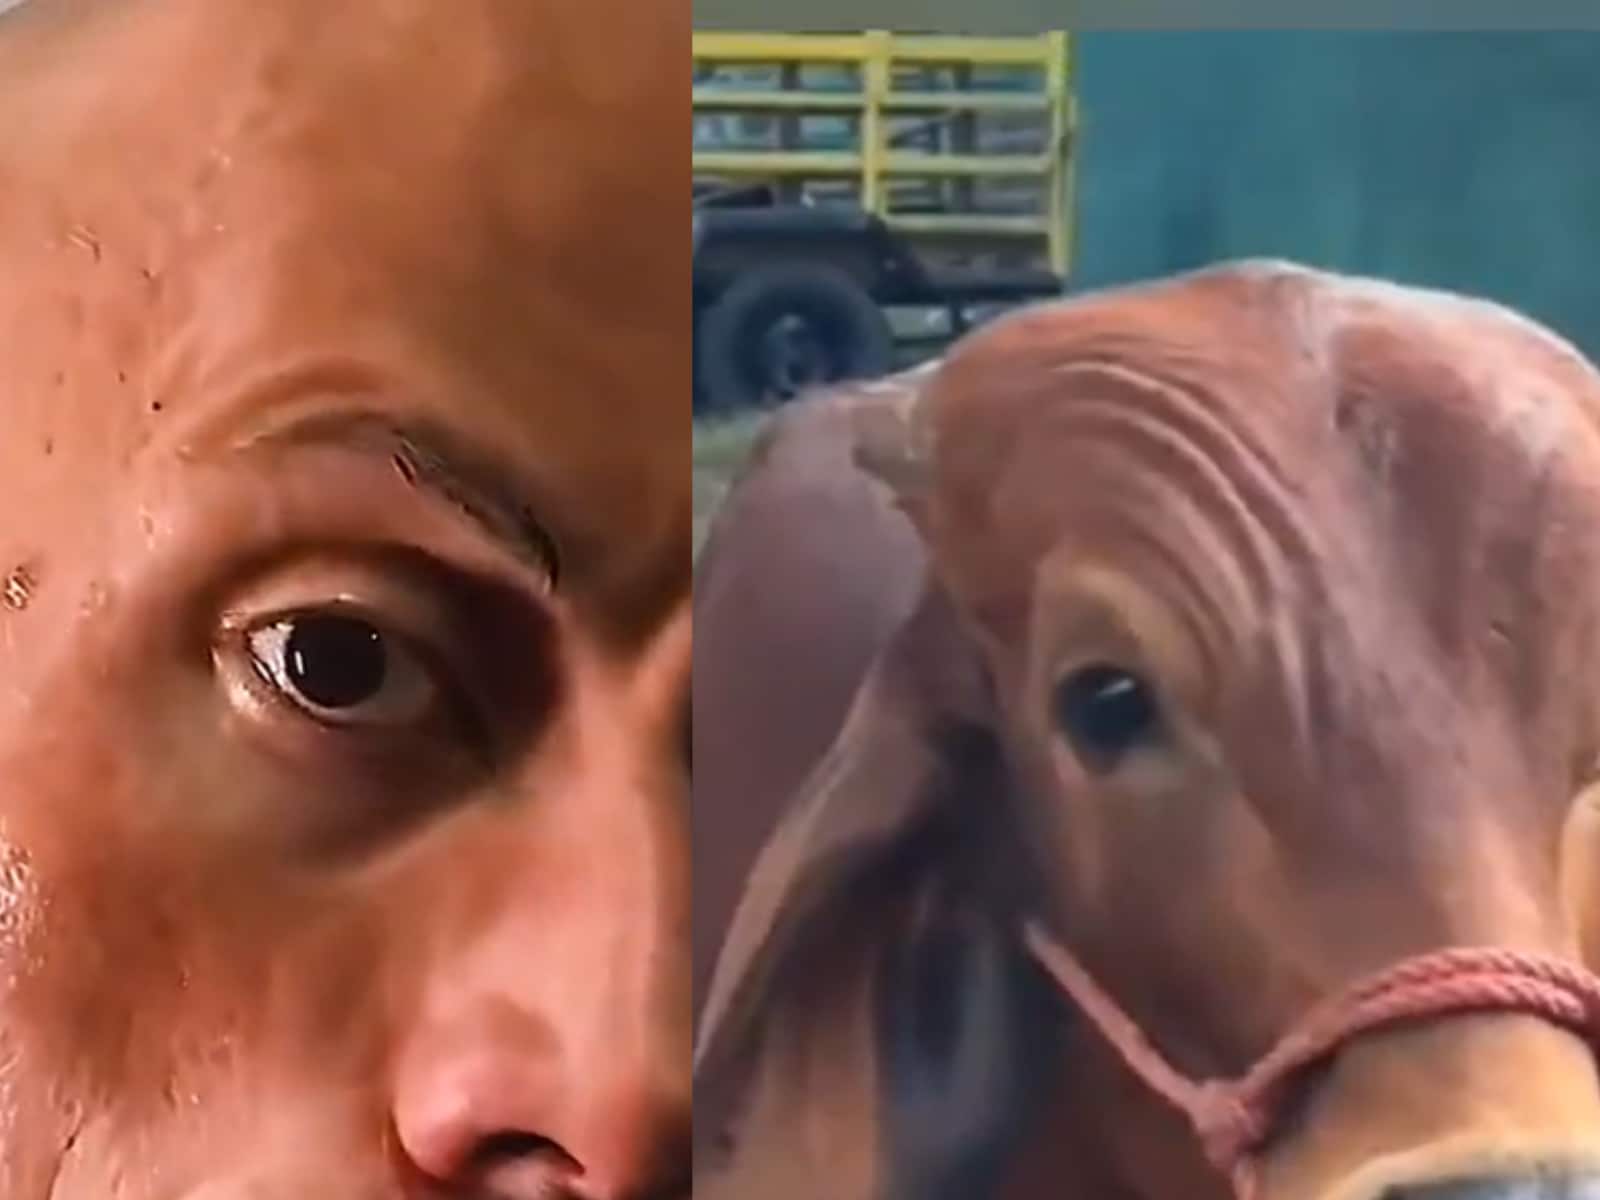 The Rock or The Cow: Who Did The Eyebrow Raising Better? - News18